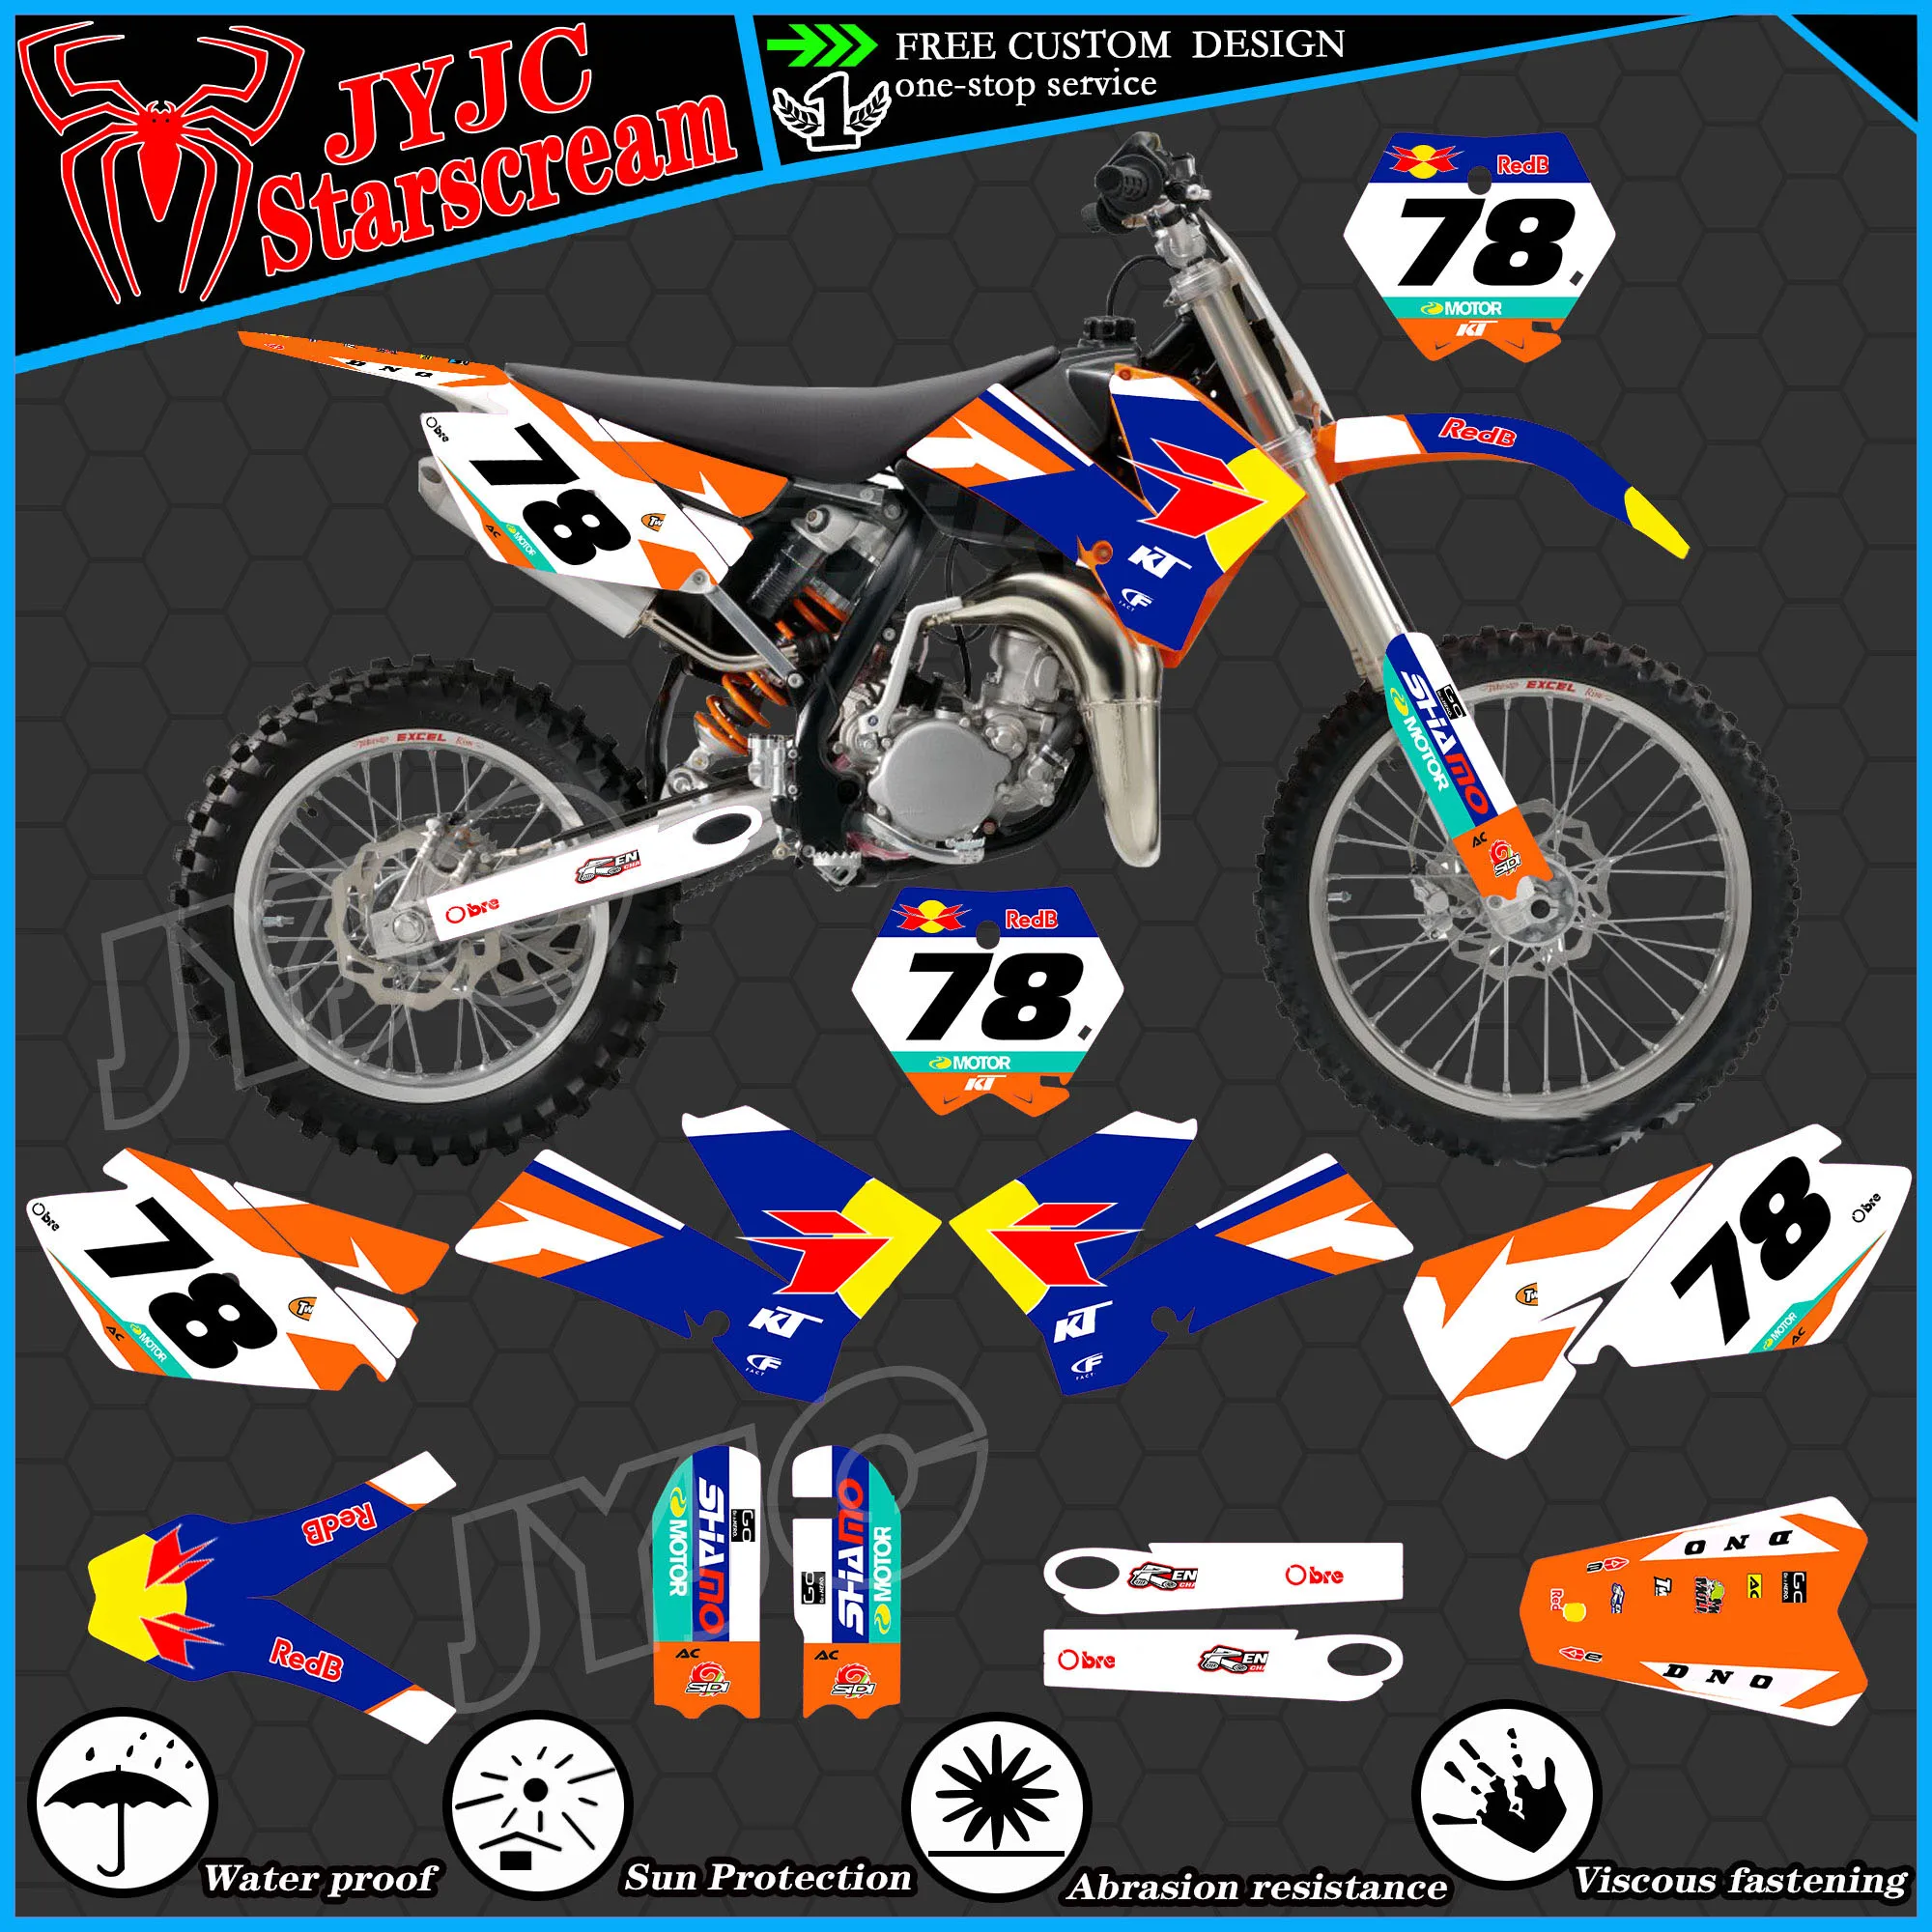 Graphic Kit for KTM 2003 2004 2005 2006 2007 2008 2009 2010 2011 2012 SX XC 85 SX XC105 Motorcycle Decal Stickers graphic kit for ktm 2003 2004 2005 2006 2007 2008 2009 2010 2011 2012 sx xc 85 sx xc105 motorcycle decal stickers